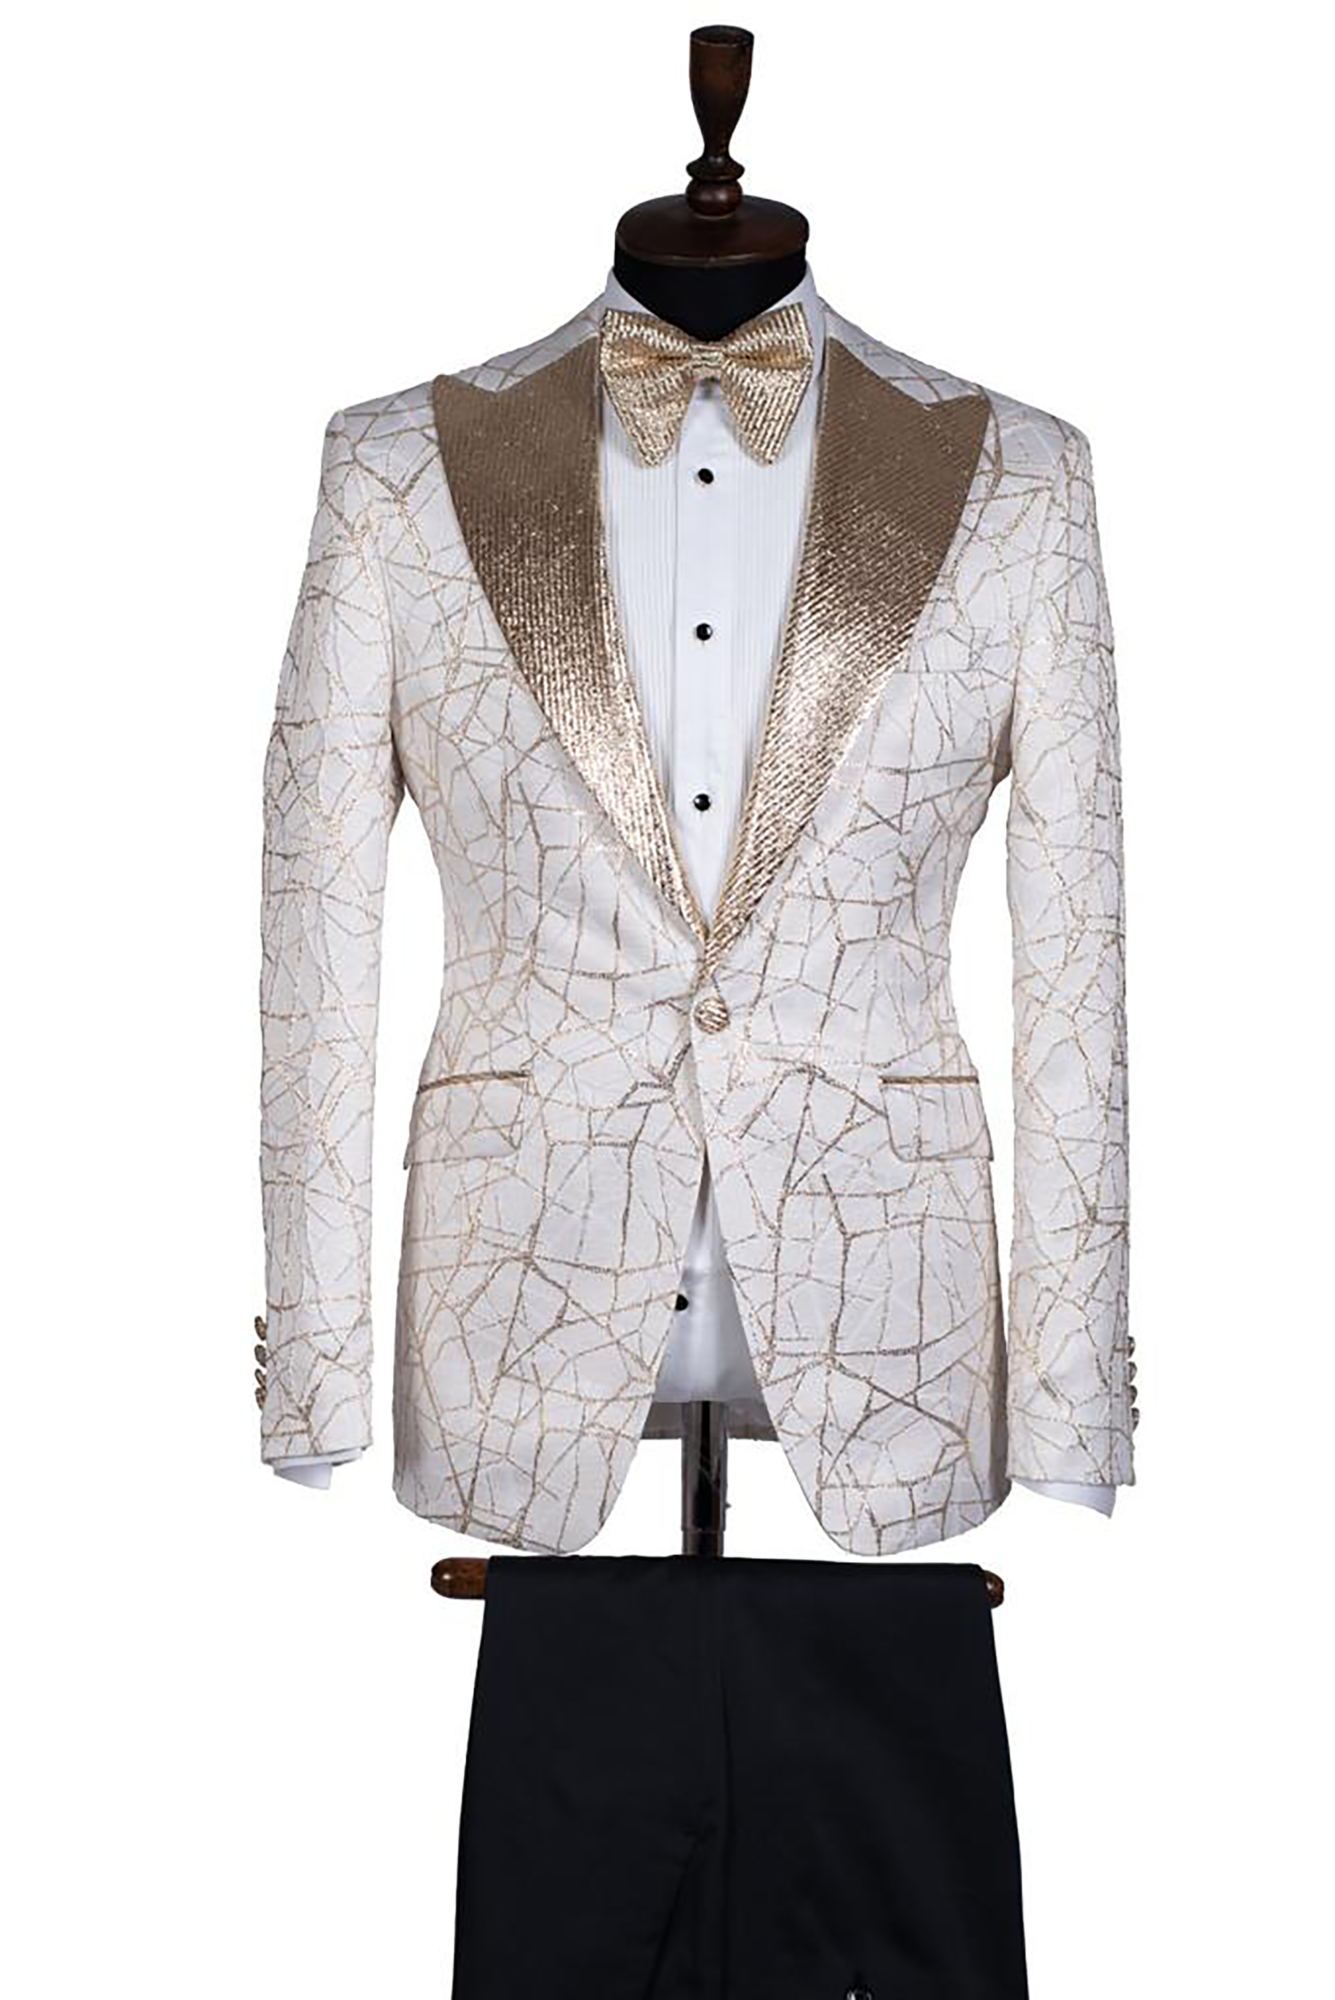 WHITE SINGLE BREASTED & GOLDEN LAPEL SUIT - Stanlion